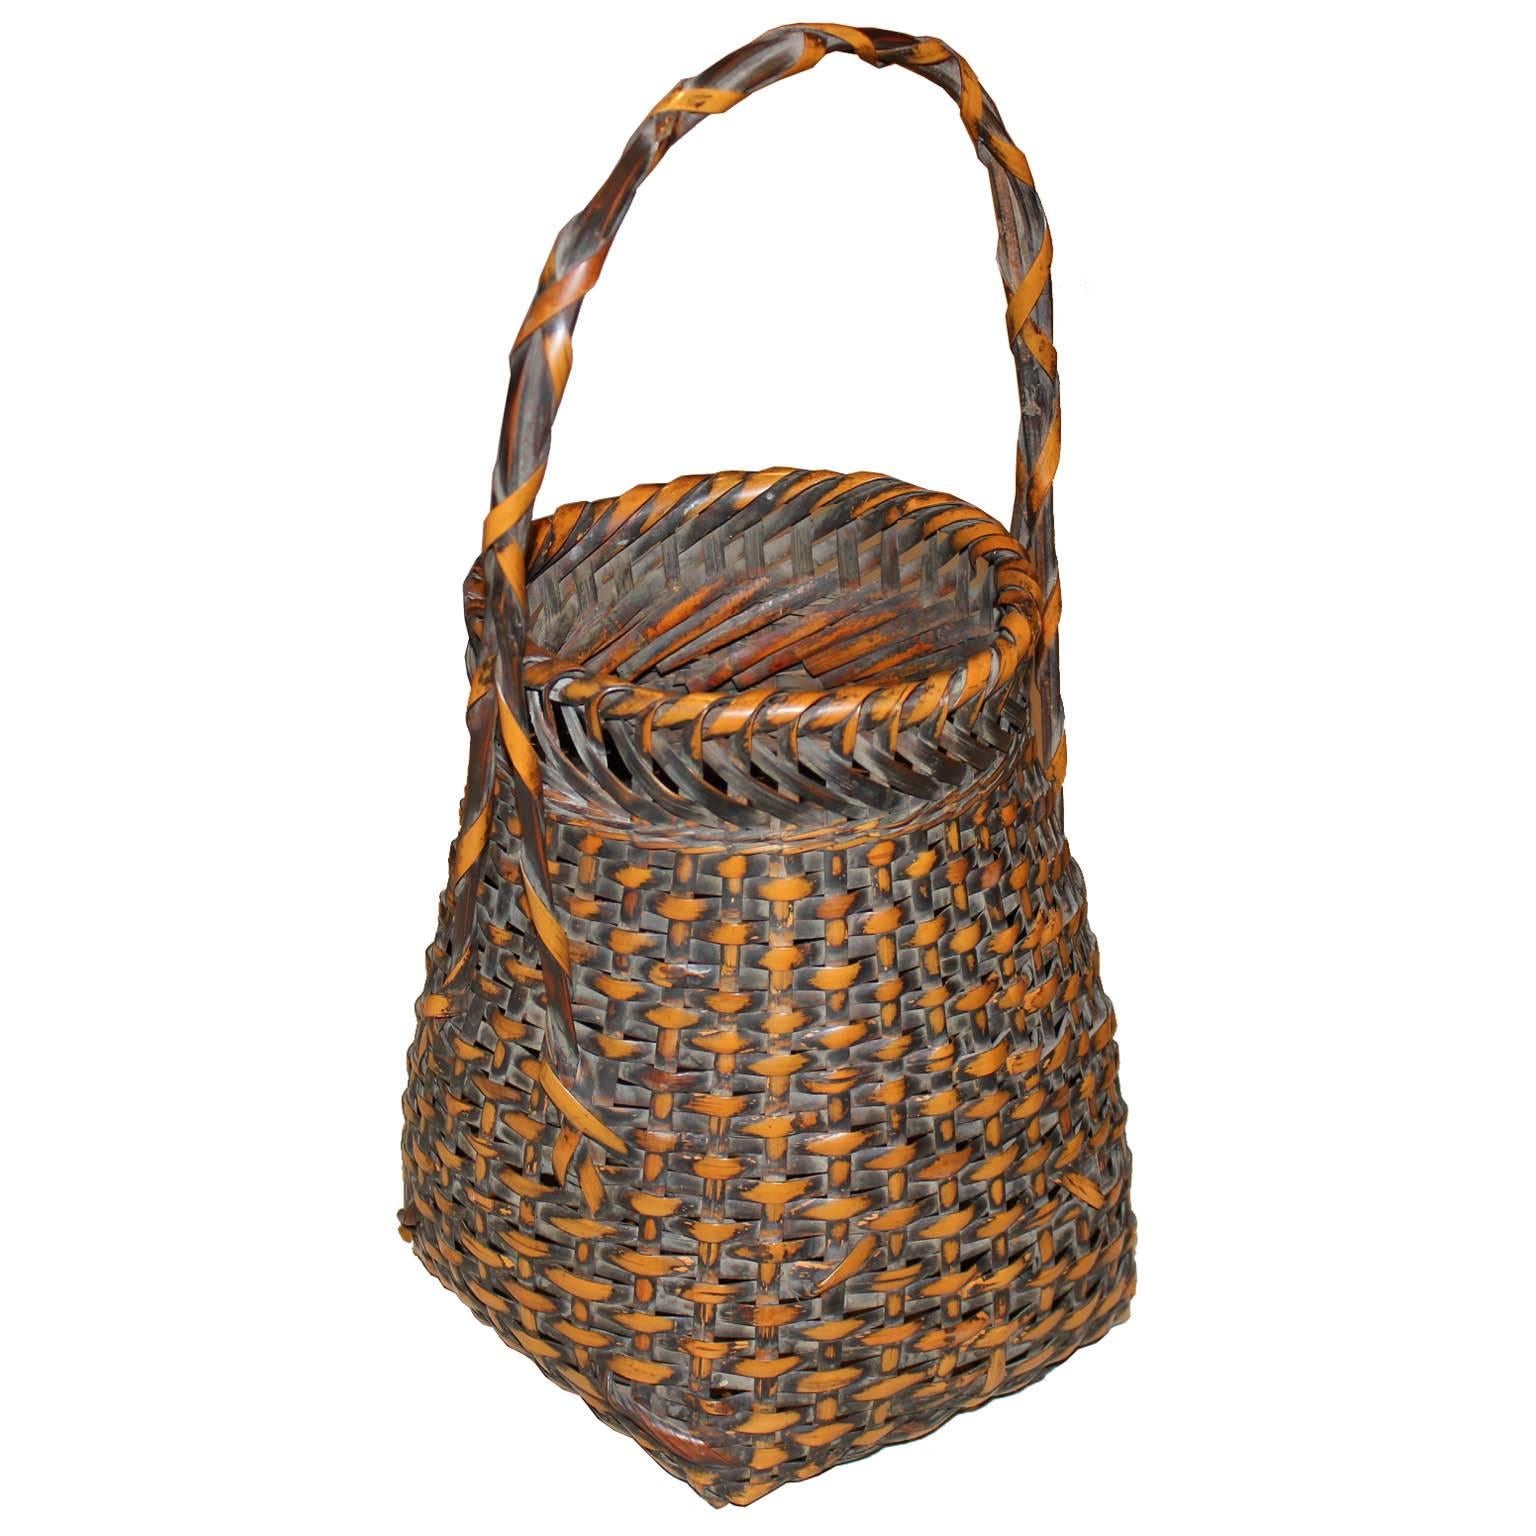 Handwoven bamboo basket originally made to hold flower arrangements for an entry way or for tea ceremonies. Taisho period, circa 1920s.